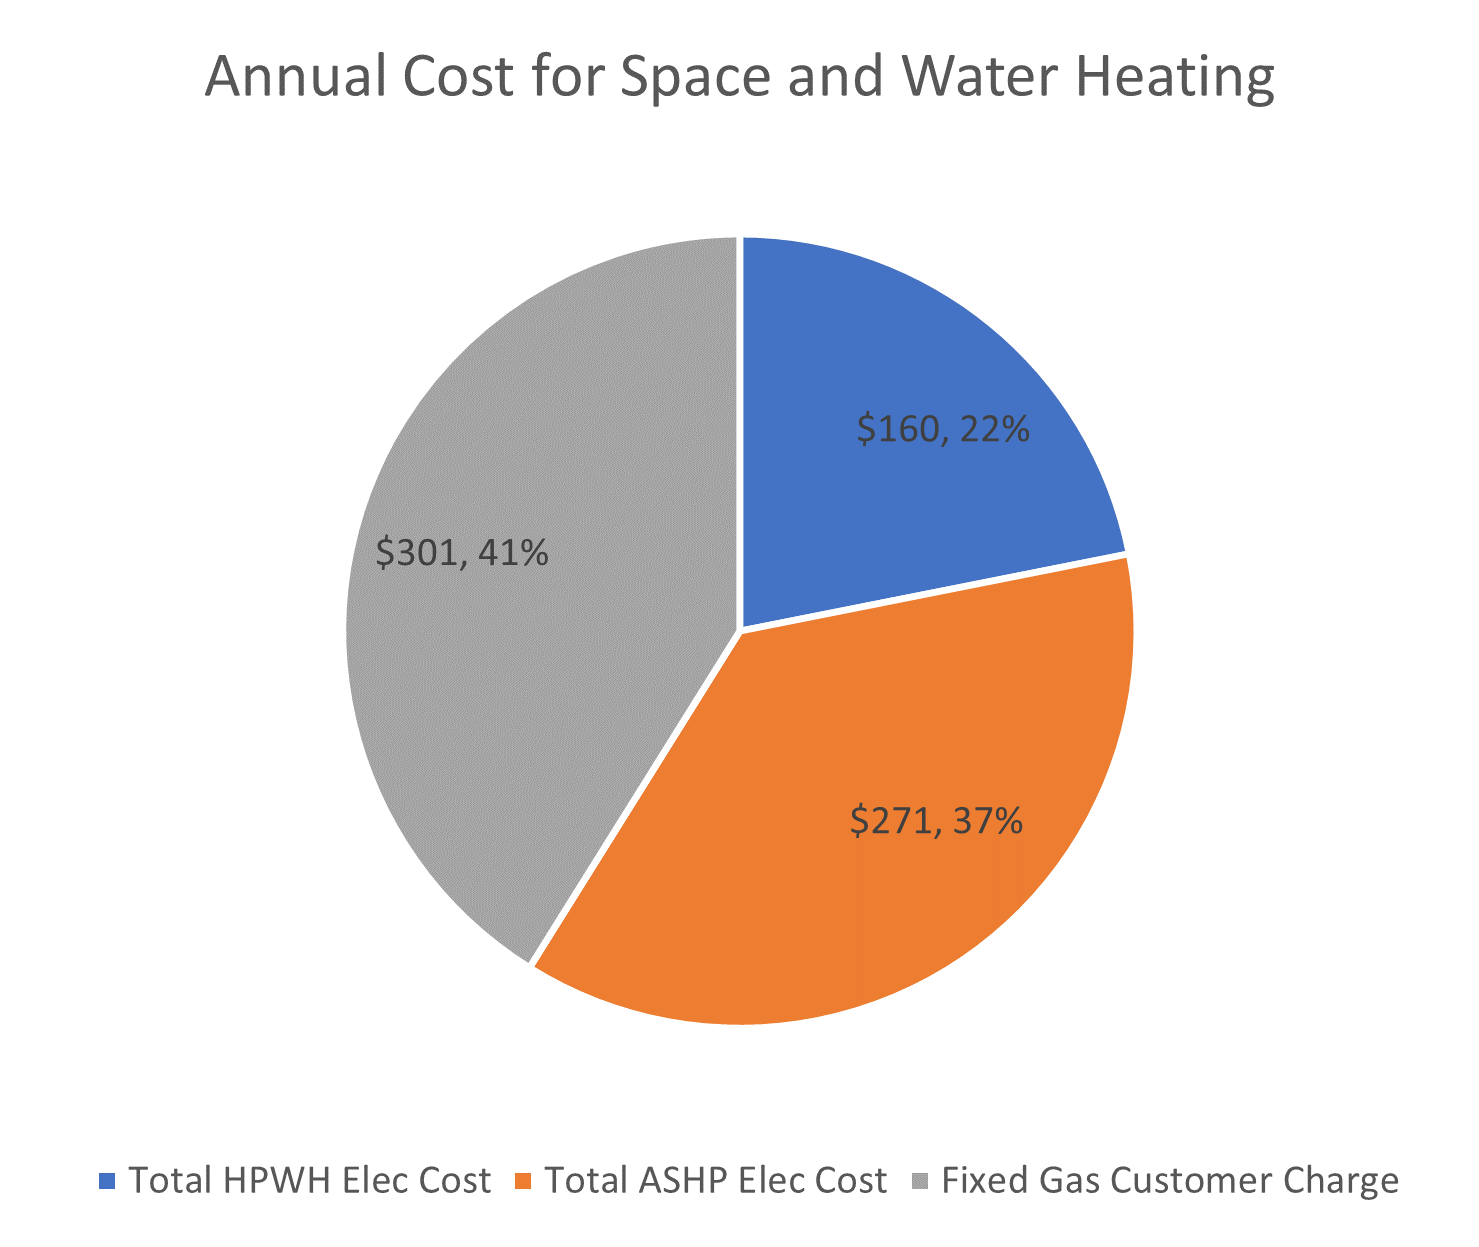 Pie chart showing the breakdown of total annual costs for space heating, water heating and the fixed gas customer charge for gas connection to the home.